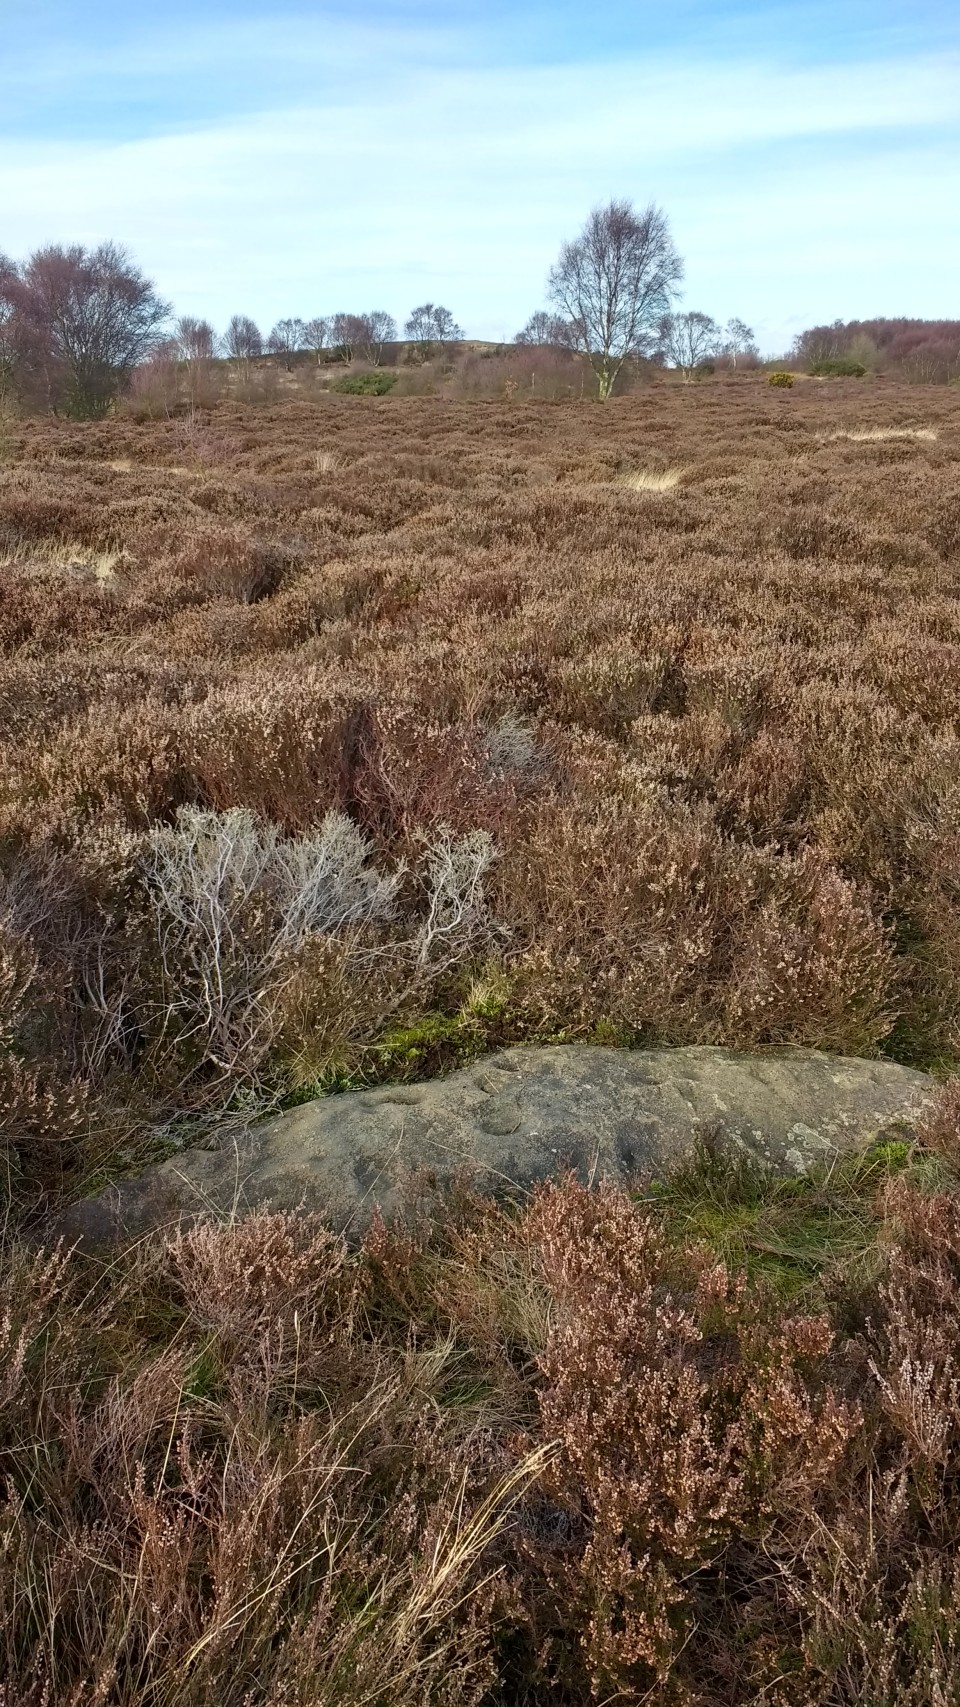 Eston Moor Carved Stone (Cup and Ring Marks / Rock Art) by spencer